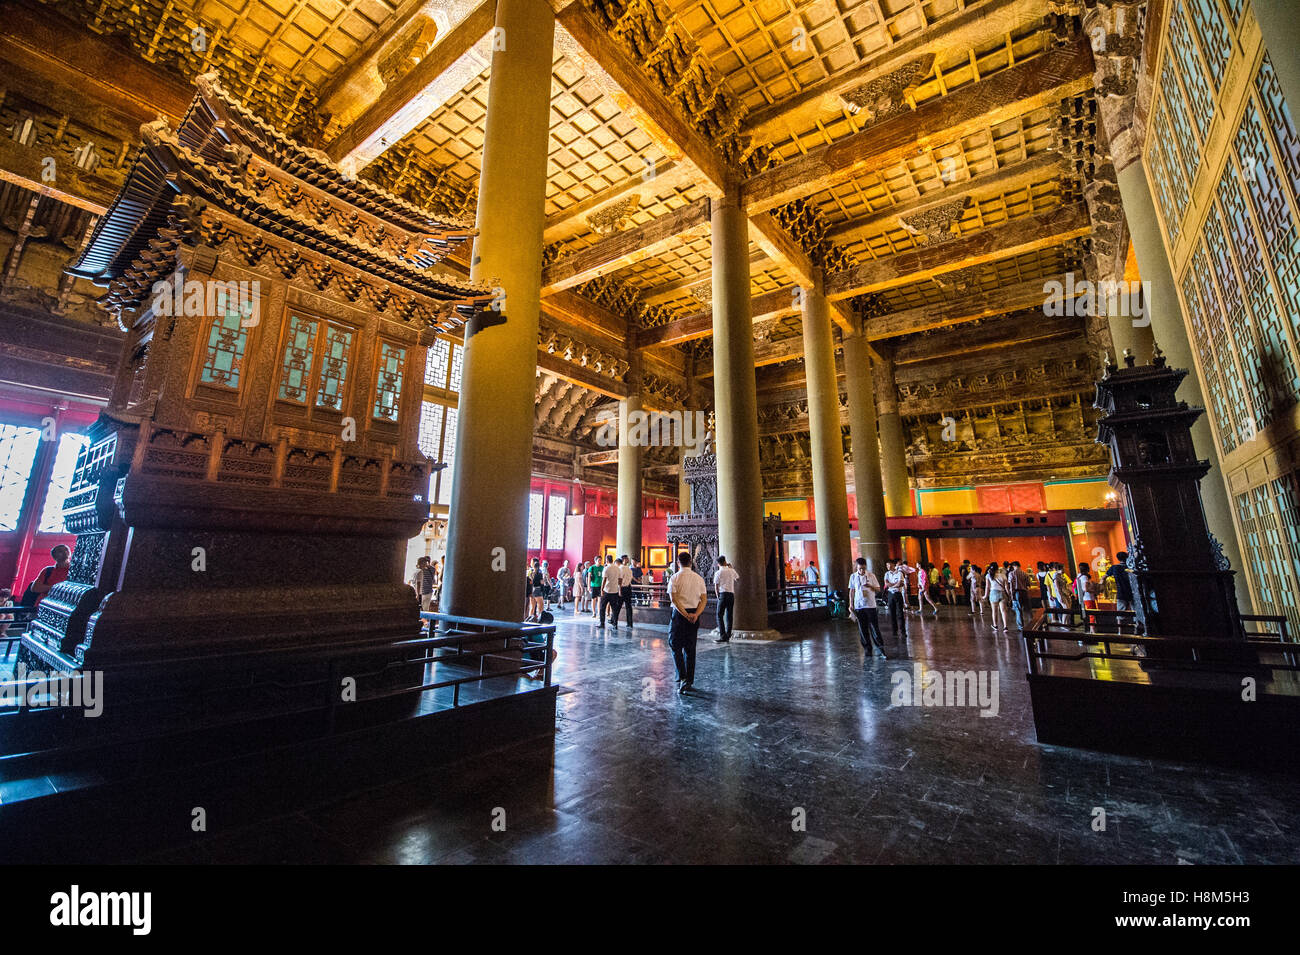 Beijing China - The ornamented architecture inside the Palace Museum located in the Forbidden City. Stock Photo